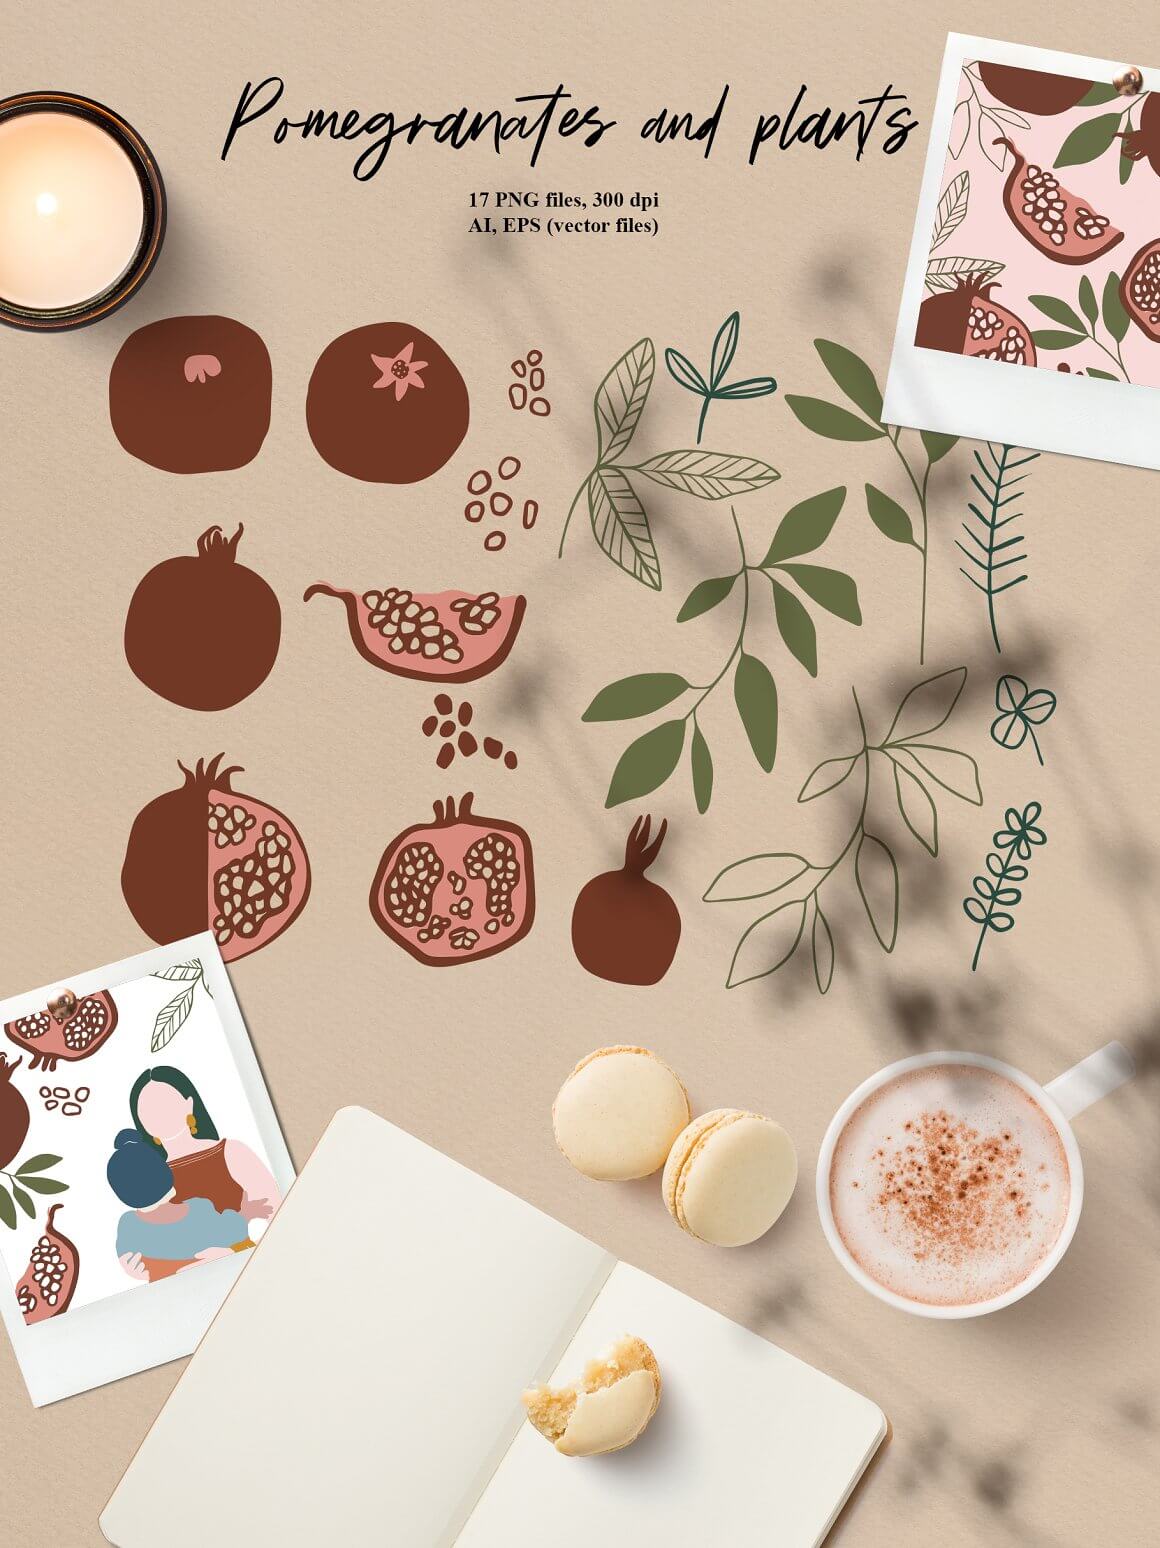 Sketches of modern images of pomegranates with seeds and plants.